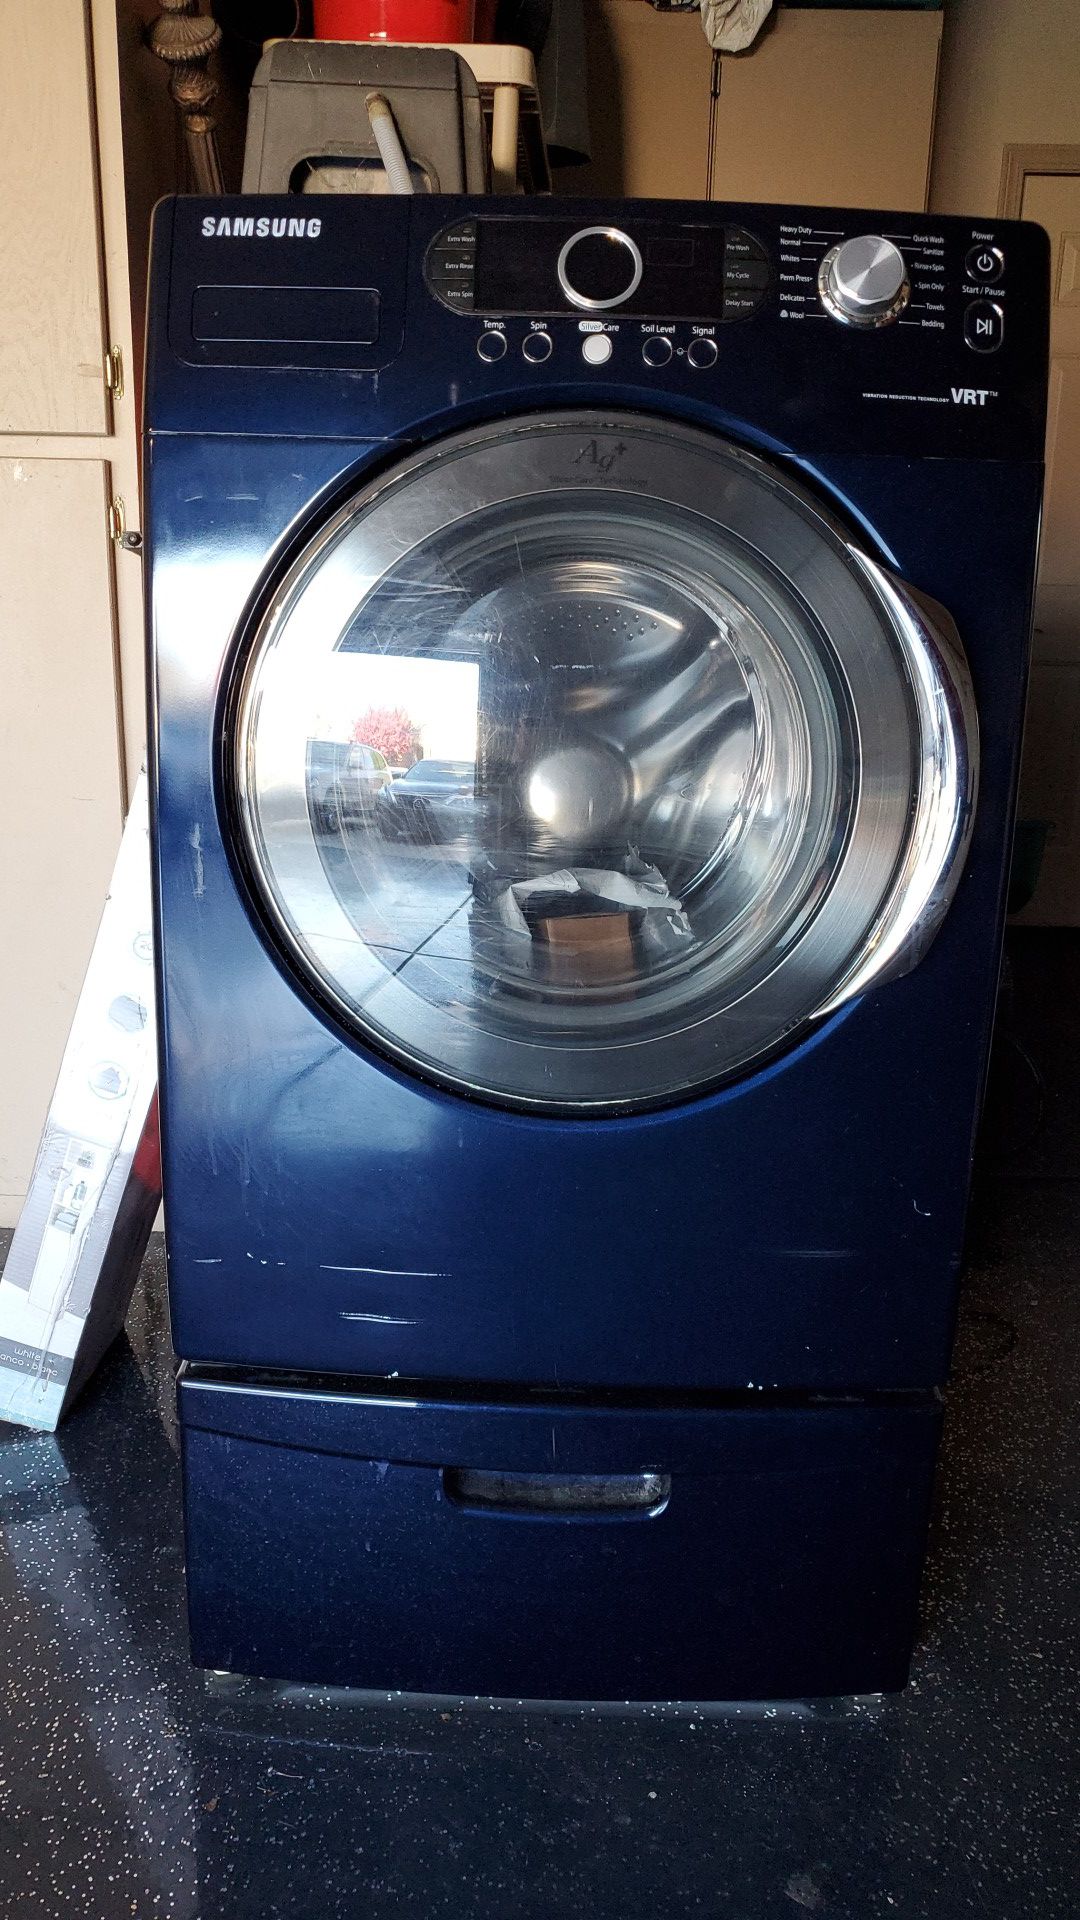 Samsung washer and pedestal and parts